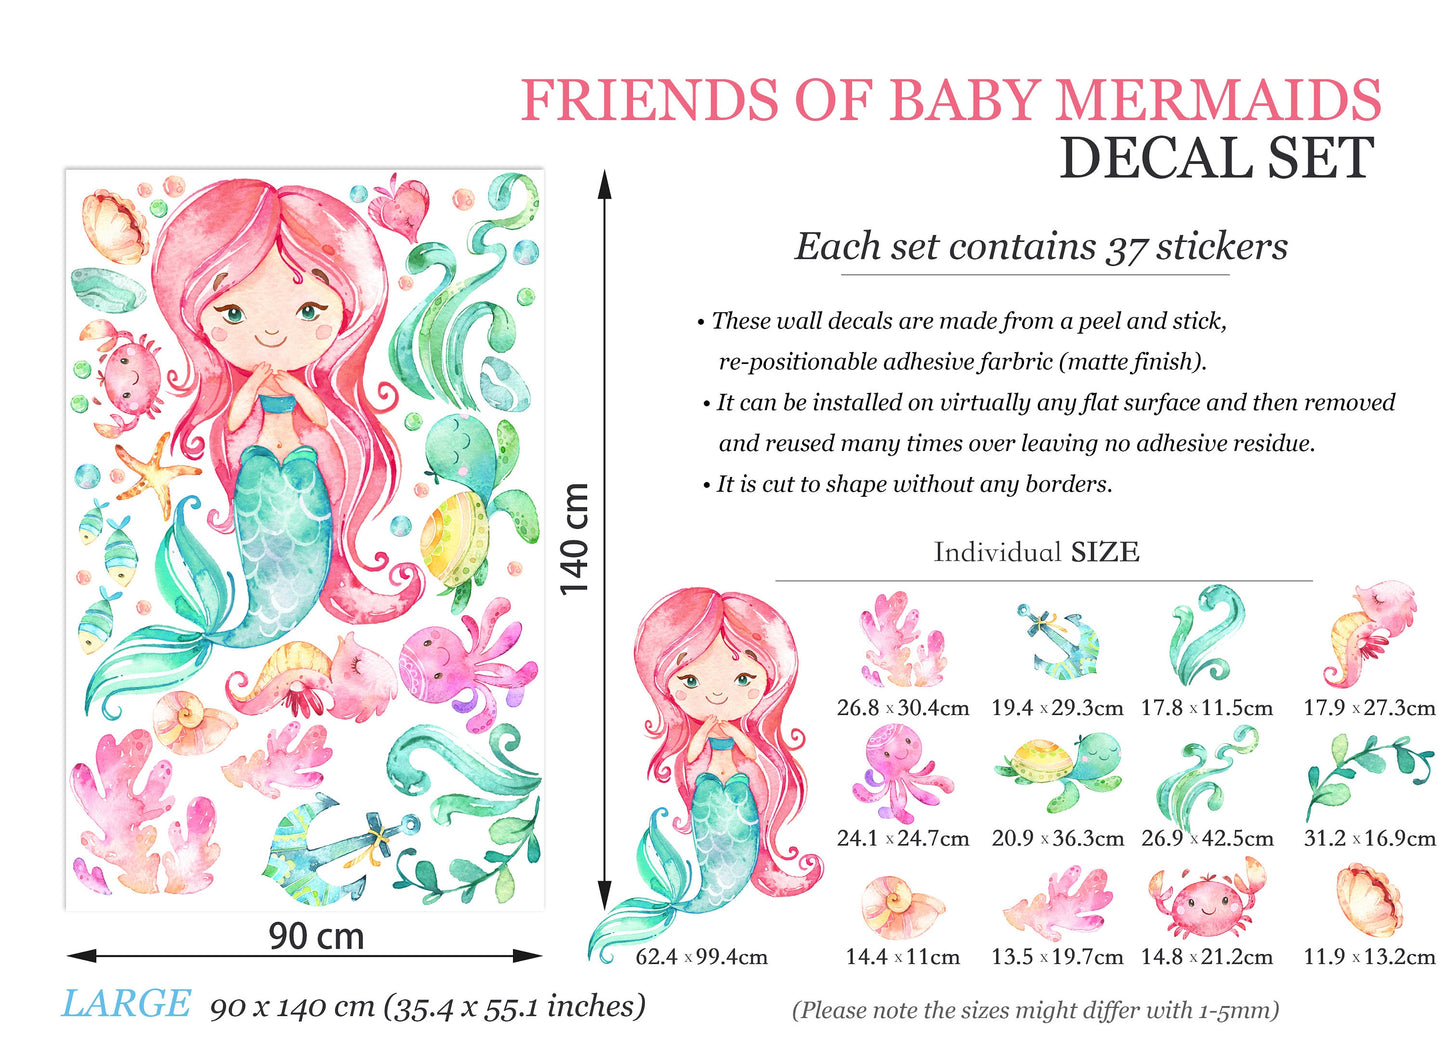 Baby Mermaid with Pink Hair and Sea Creature Friends Wall Decal - BR068